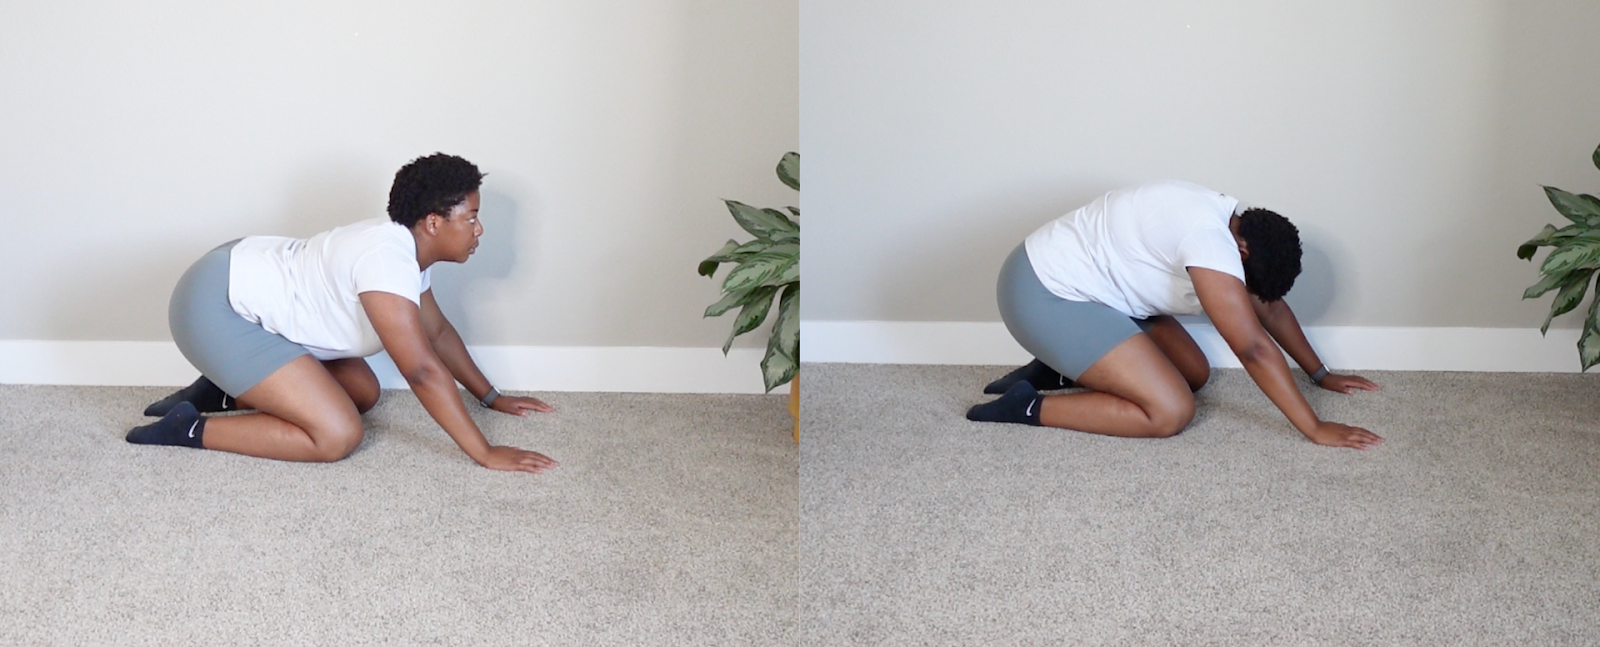 Person is on all fours performing a thoracic mobility exercise called the cat camel stretch. The person is sitting back onto their heels to better target the thoracic spine. From here person is shown demonstrating alternating arching back up towards the ceiling and sinking into their upper back